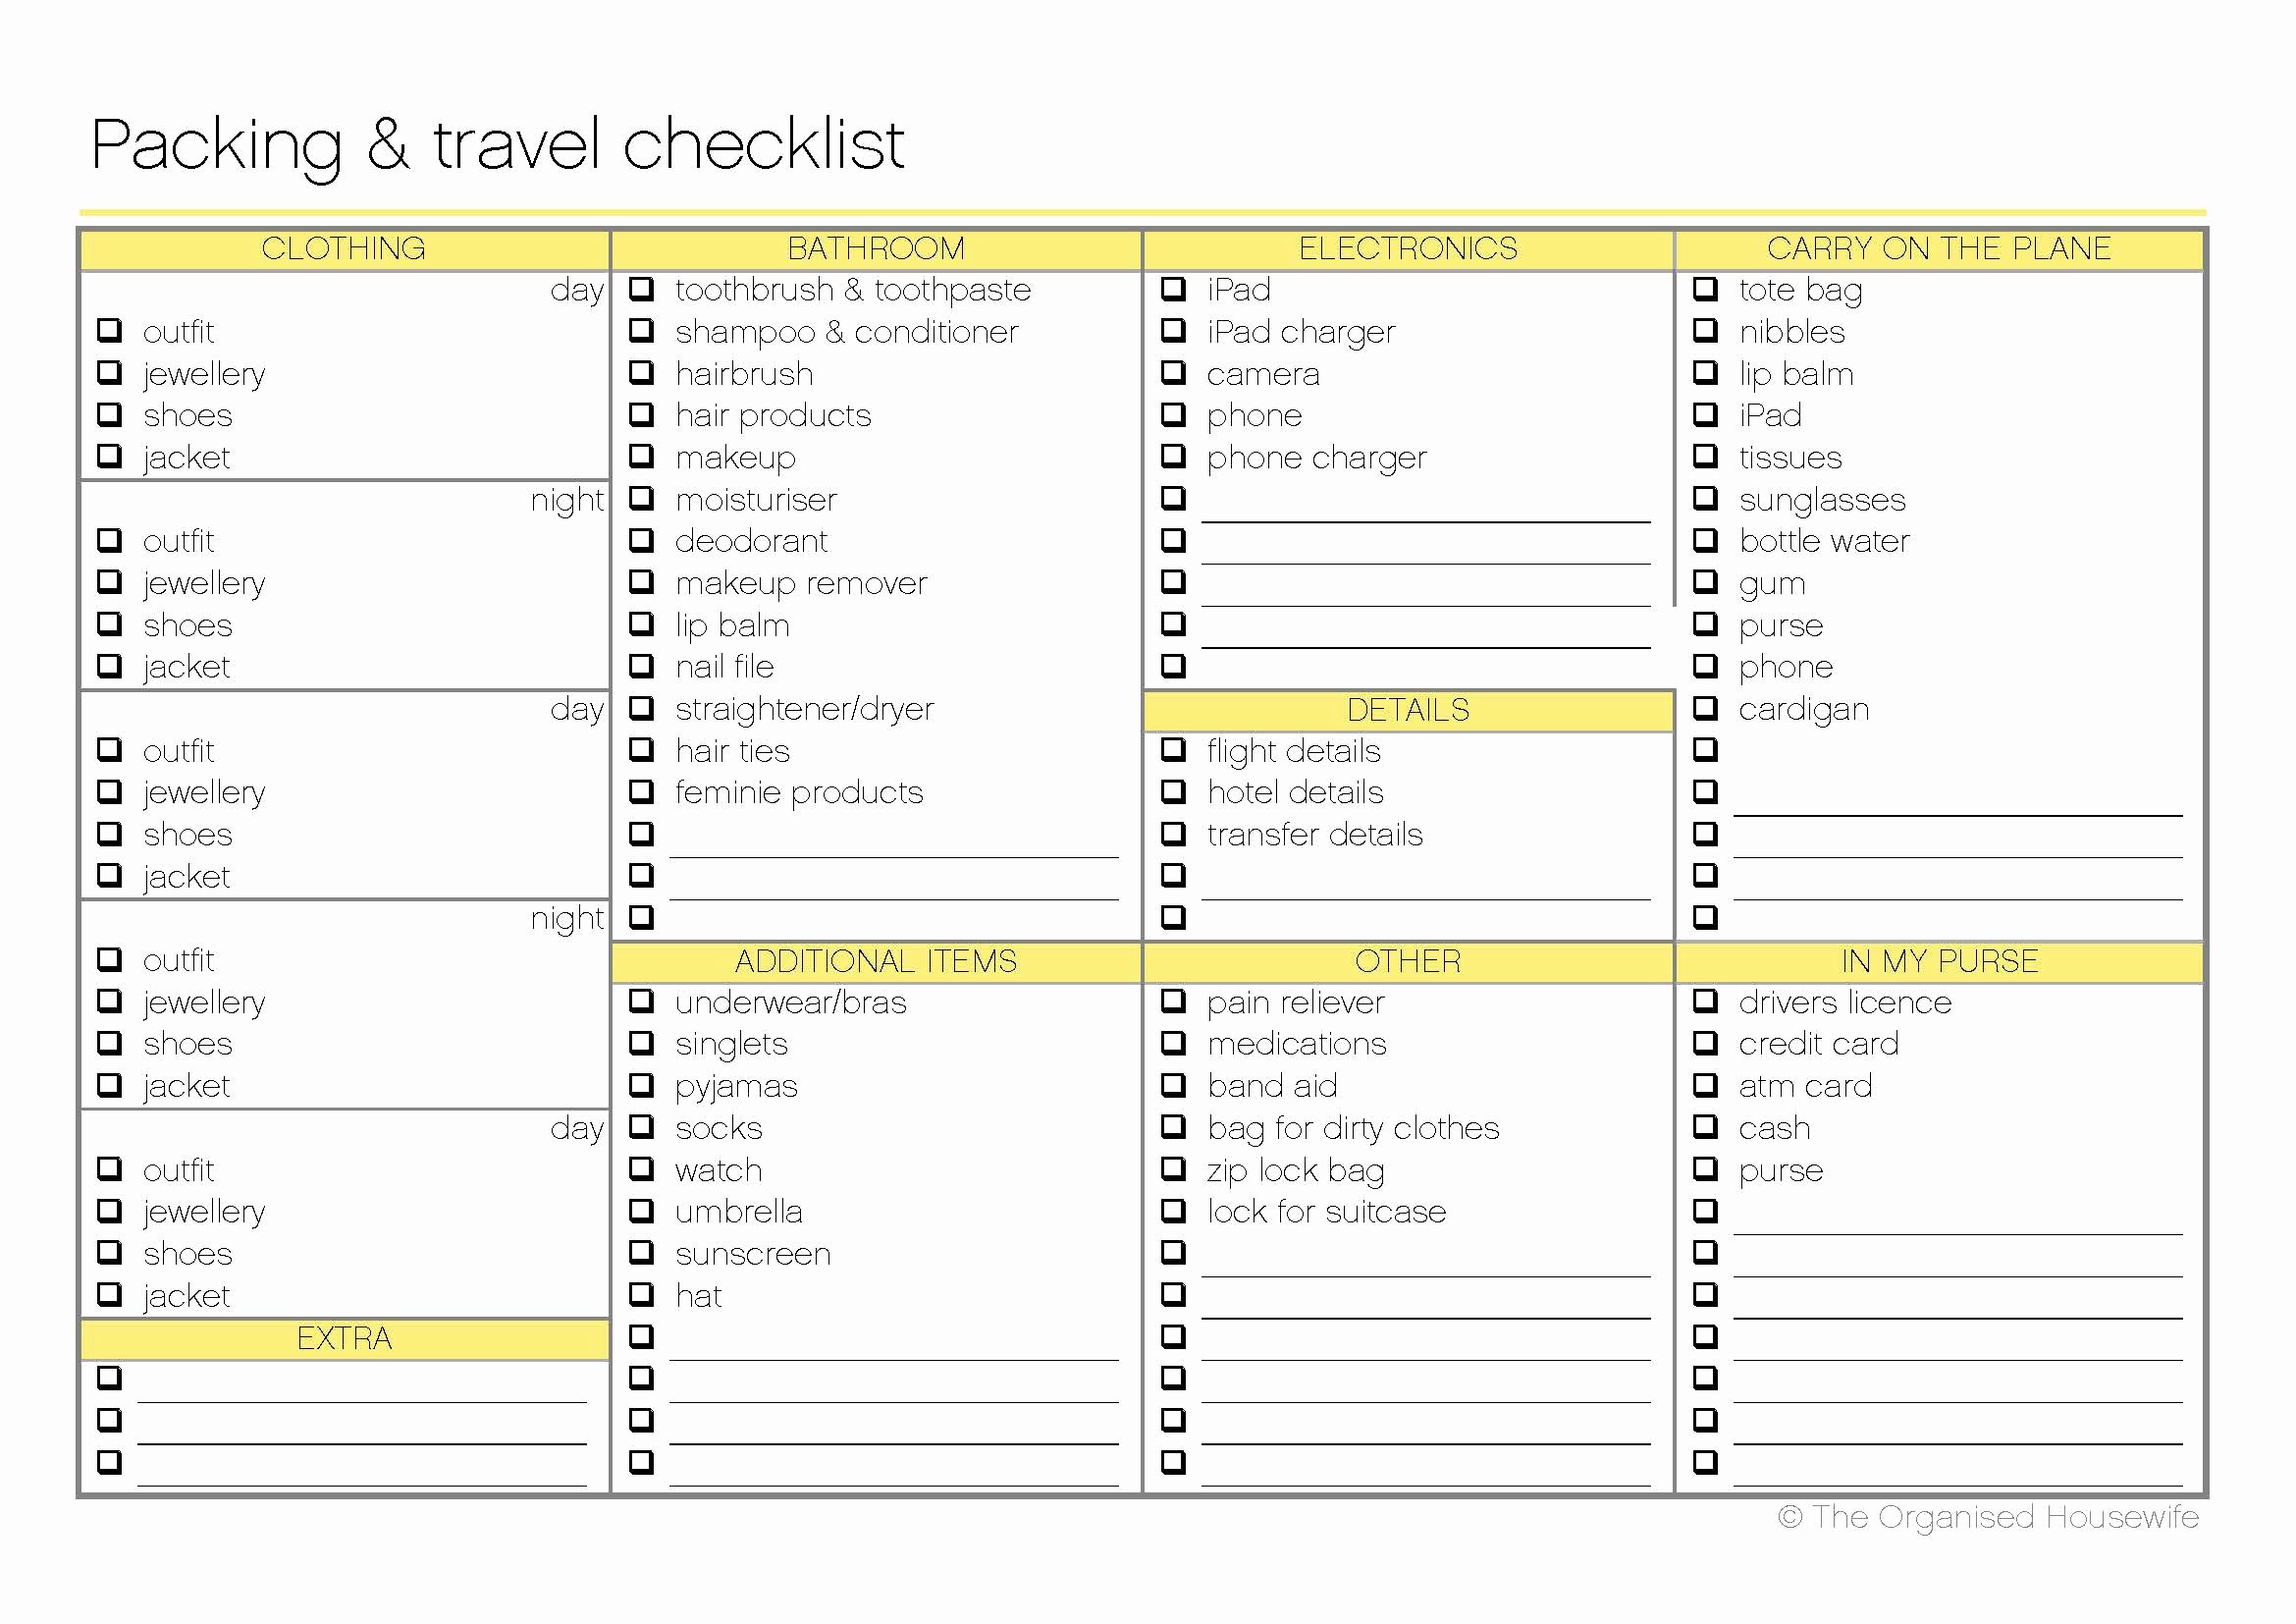 Free Packing List Template Awesome Free Printable Packing and Travel Checklist the